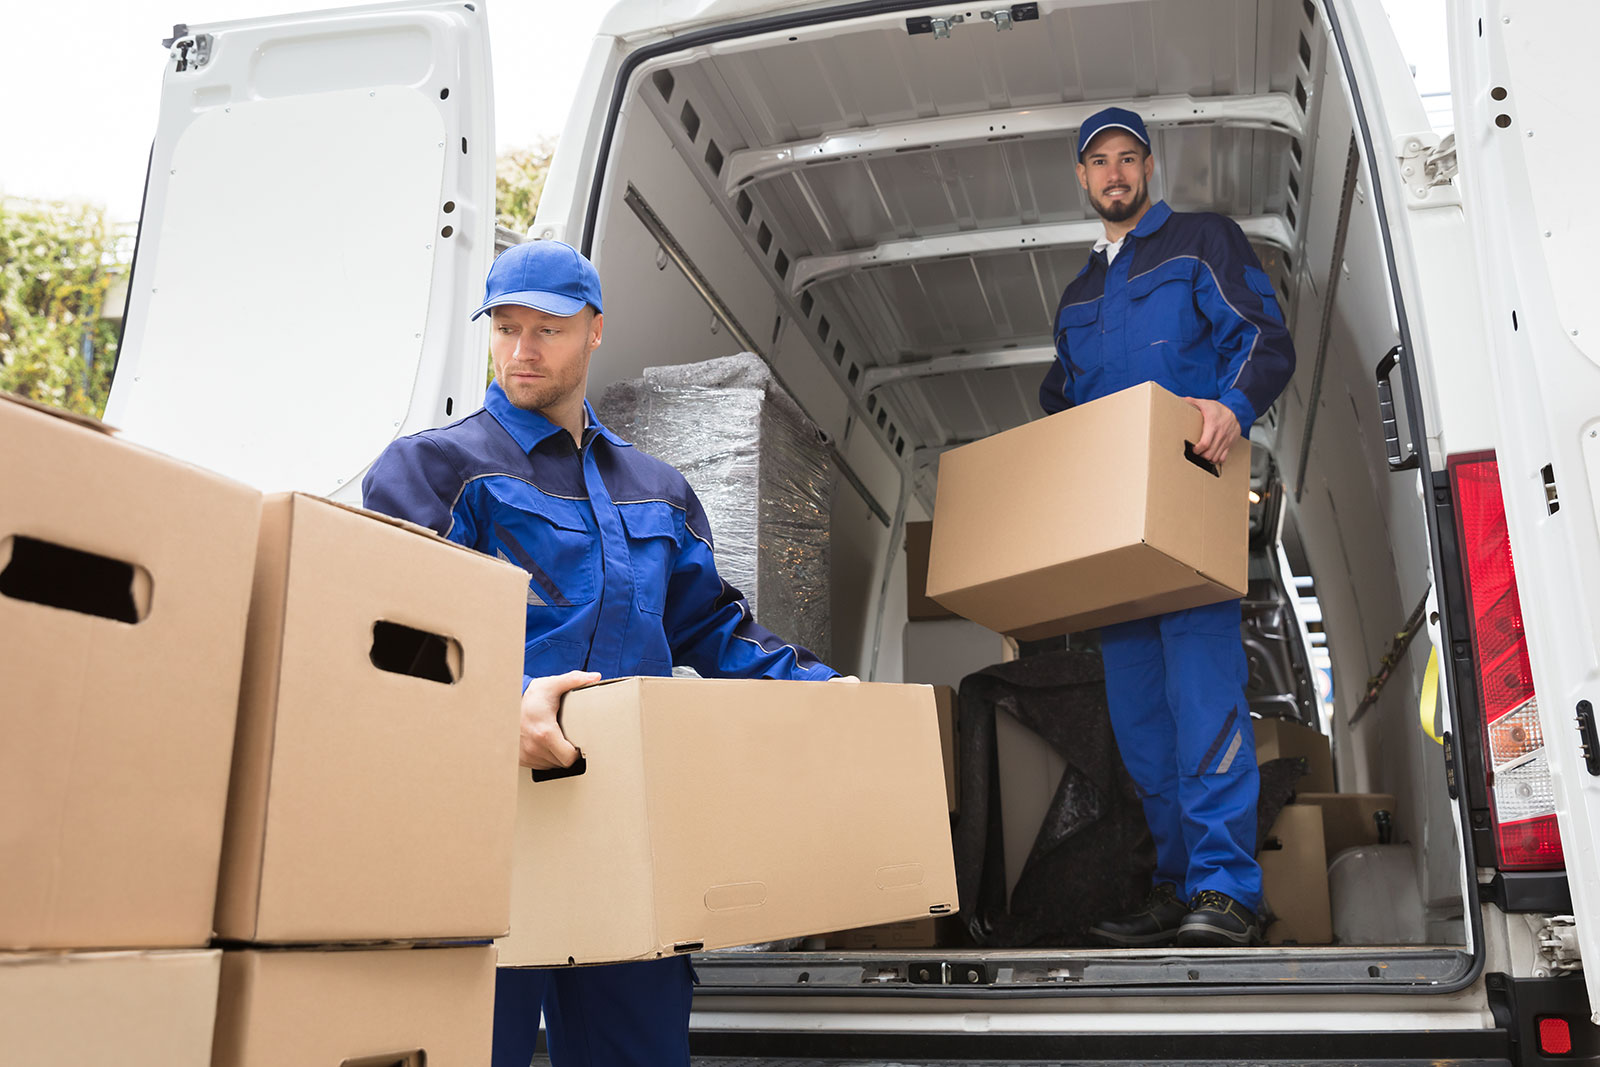 6 Important Questions to Ask Before Hiring a Moving Company